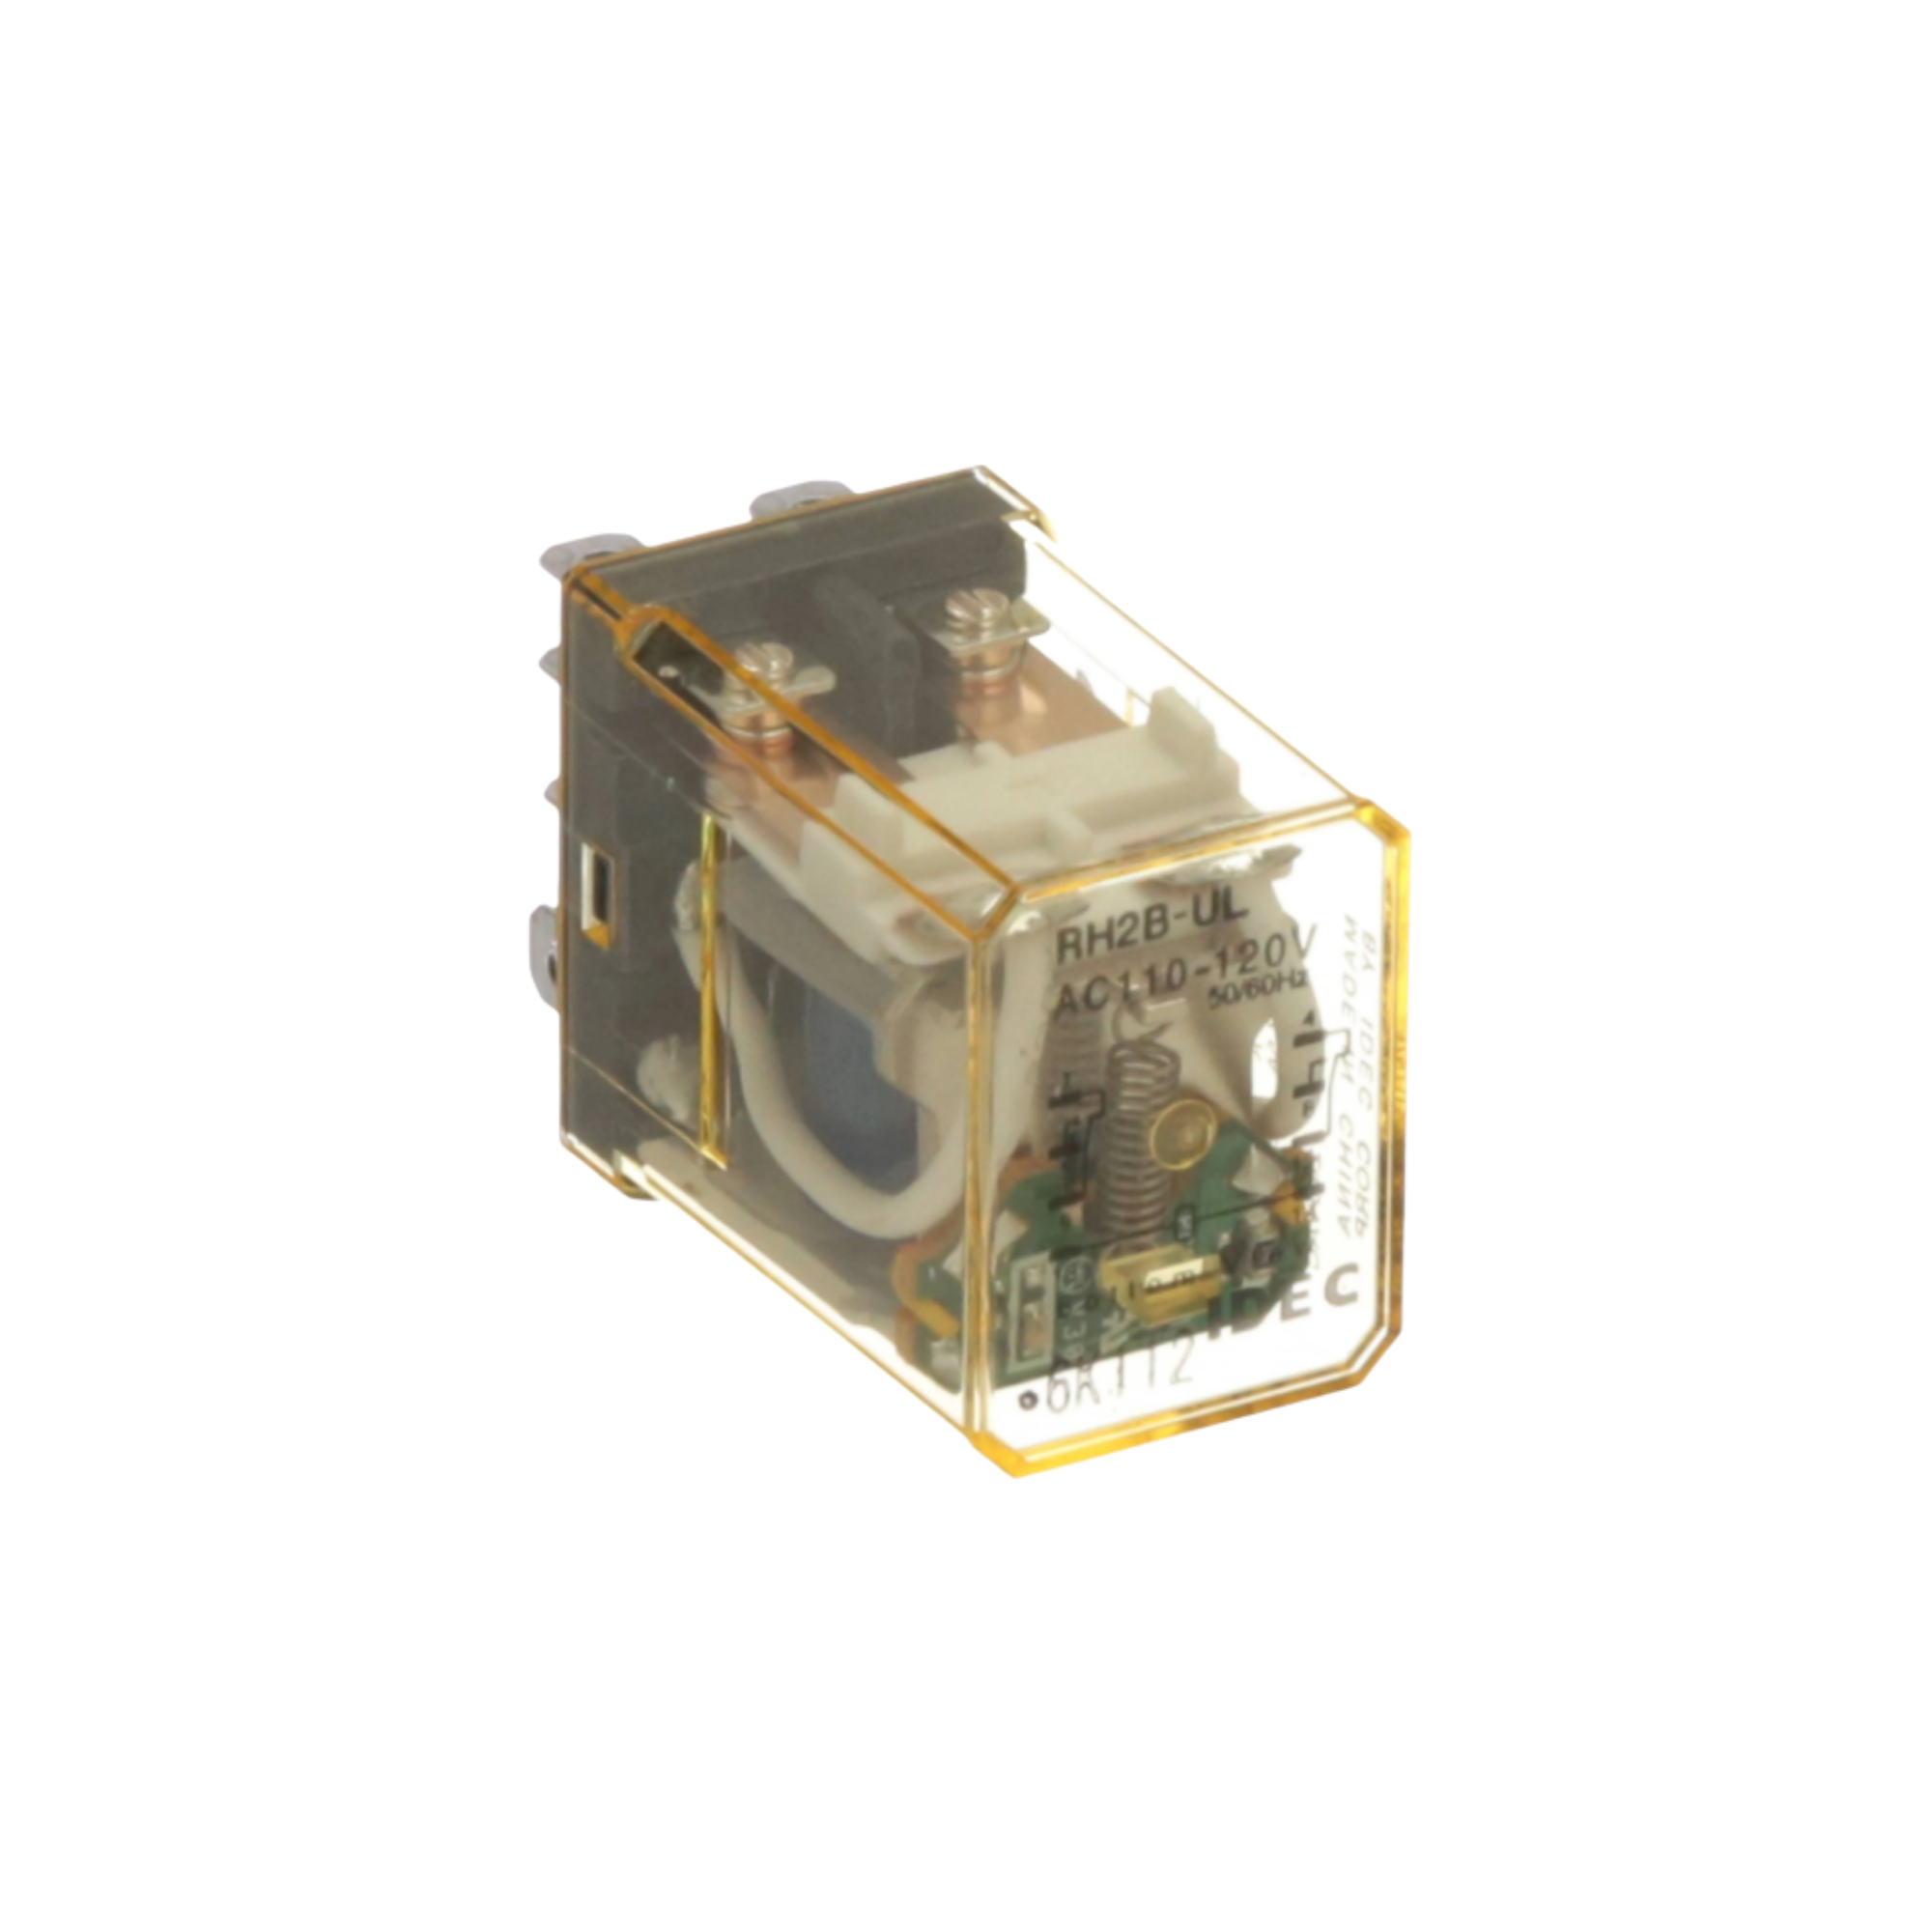 side view of rectangular relay unit with clear yellow housing, wires and contacts inside, and metal tabs at the back